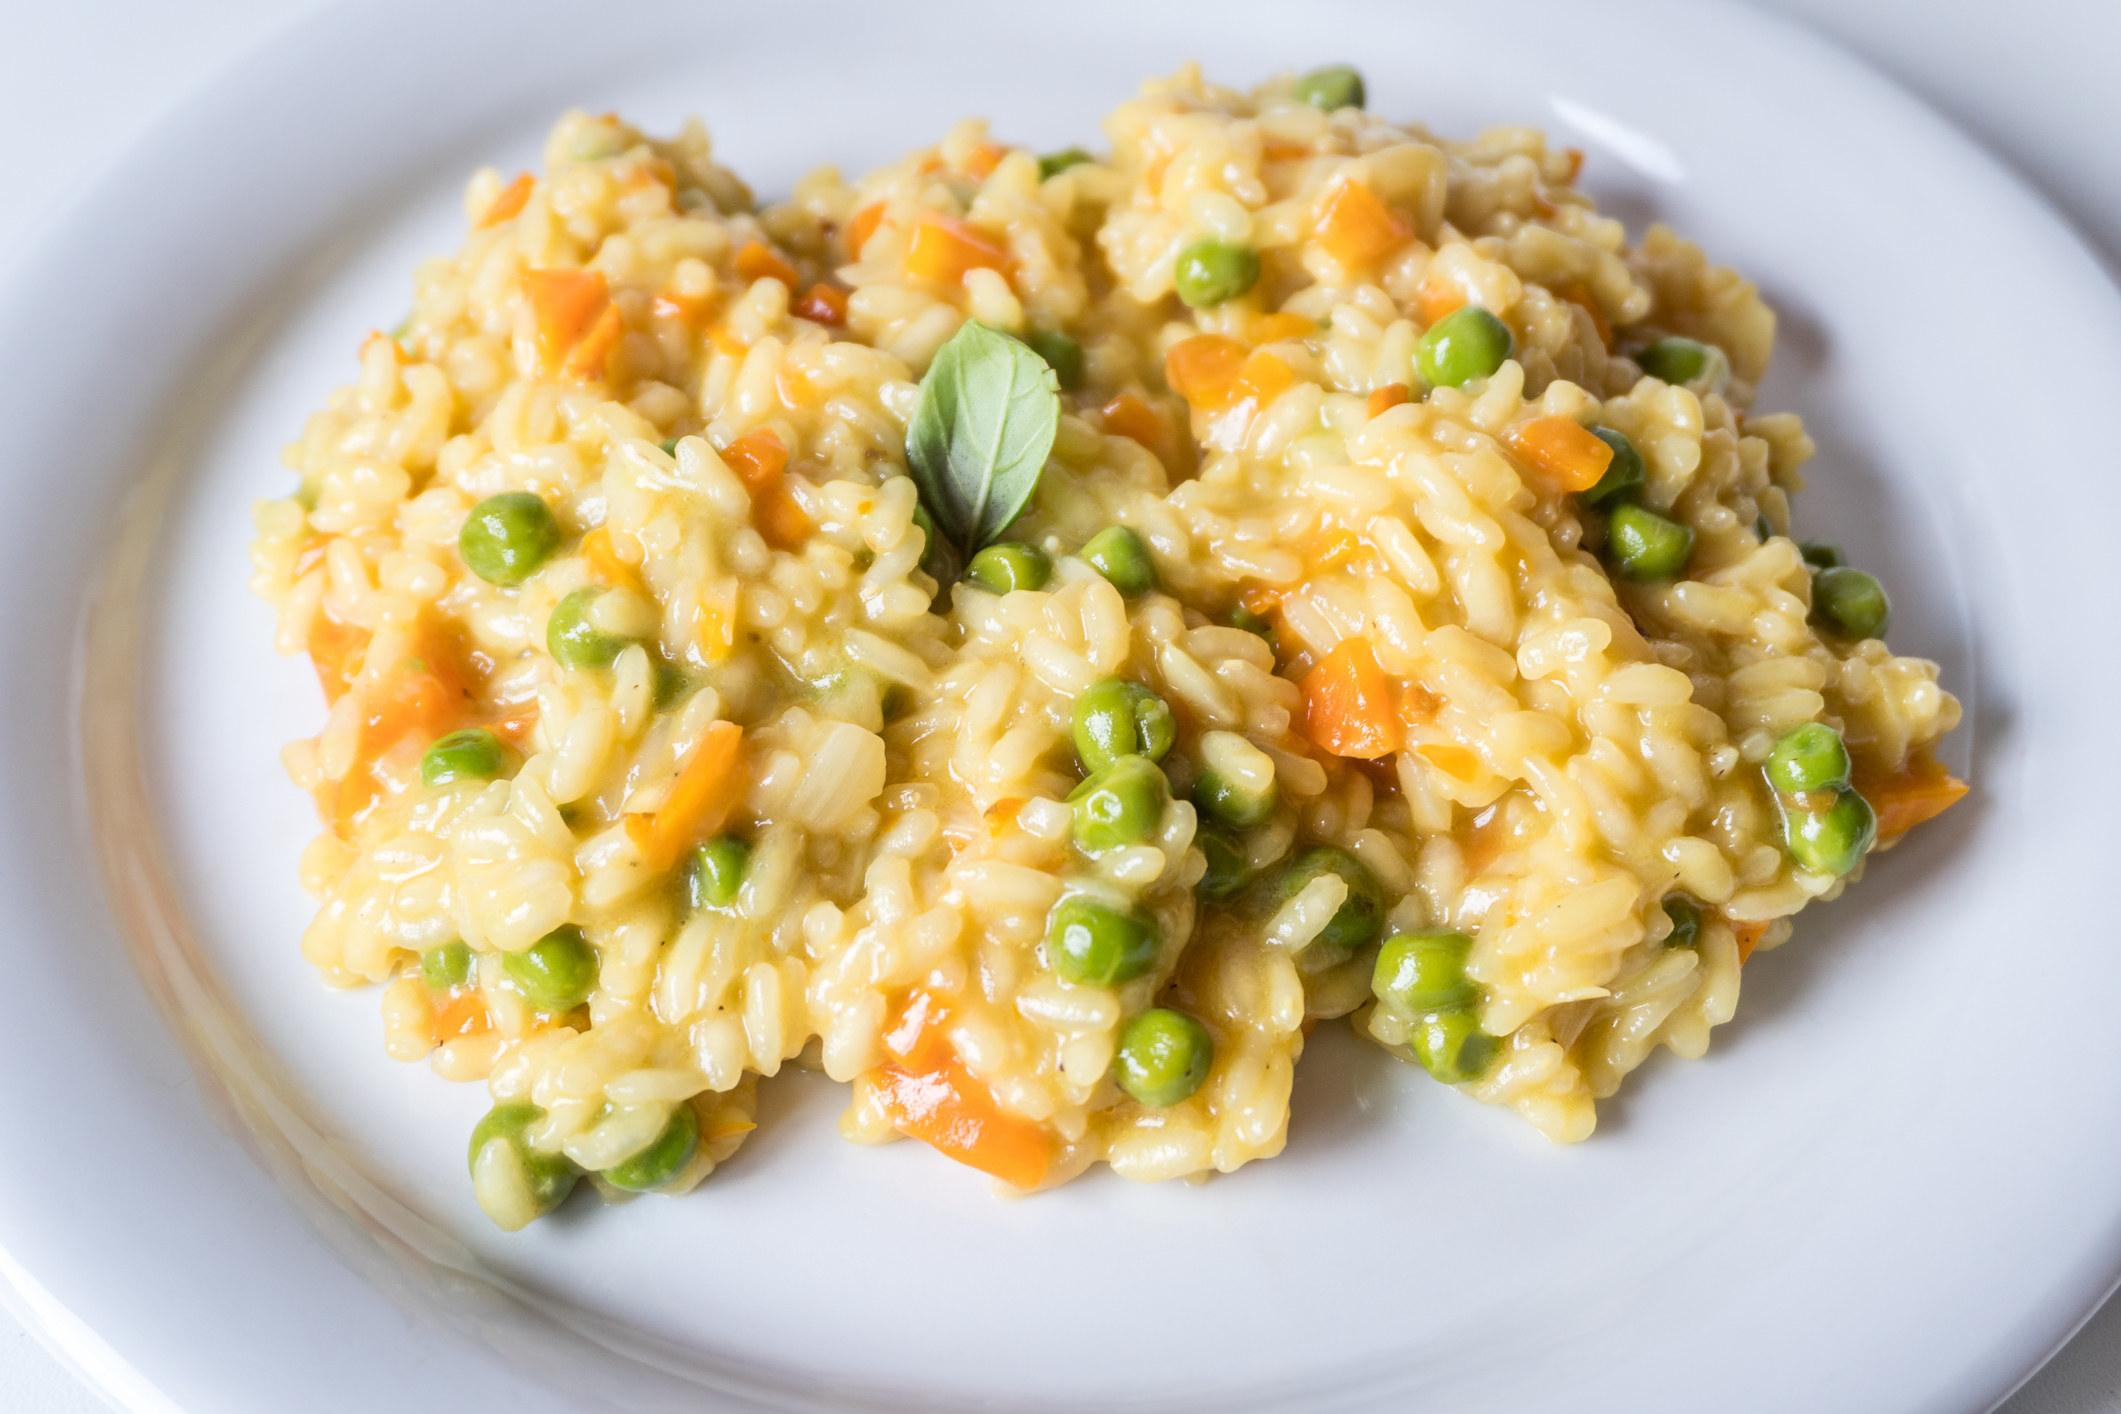 Plate of risotto with vegetables